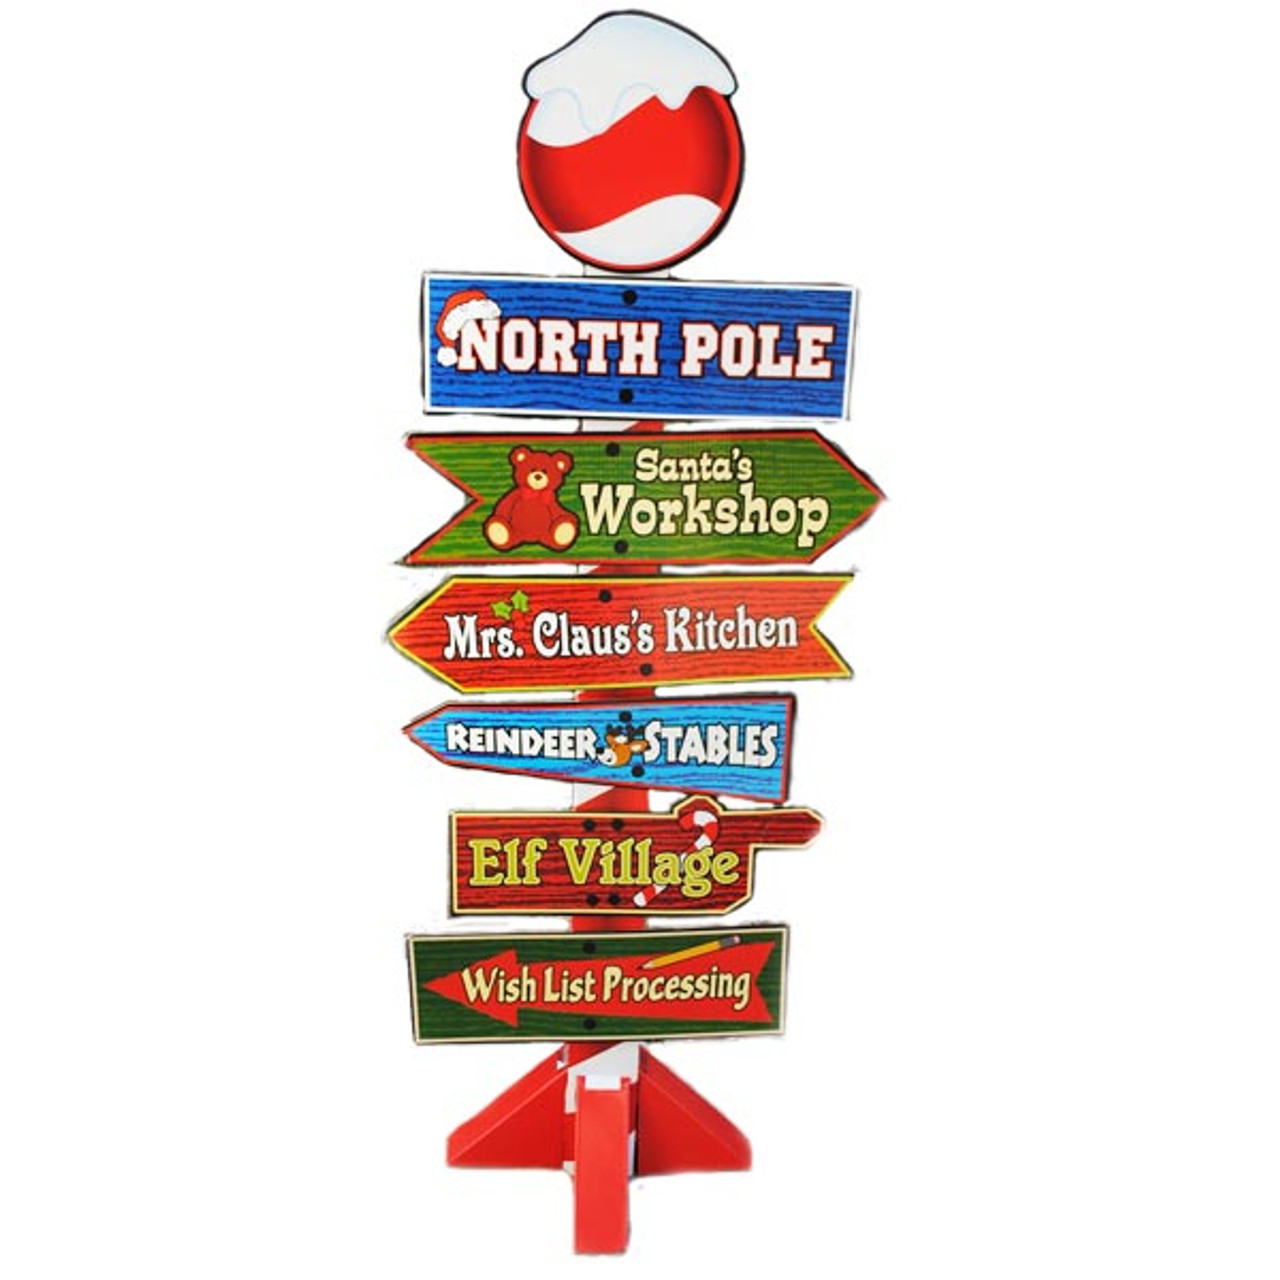 North Pole Directional Sign Darling Christmas Decoration for Your Party